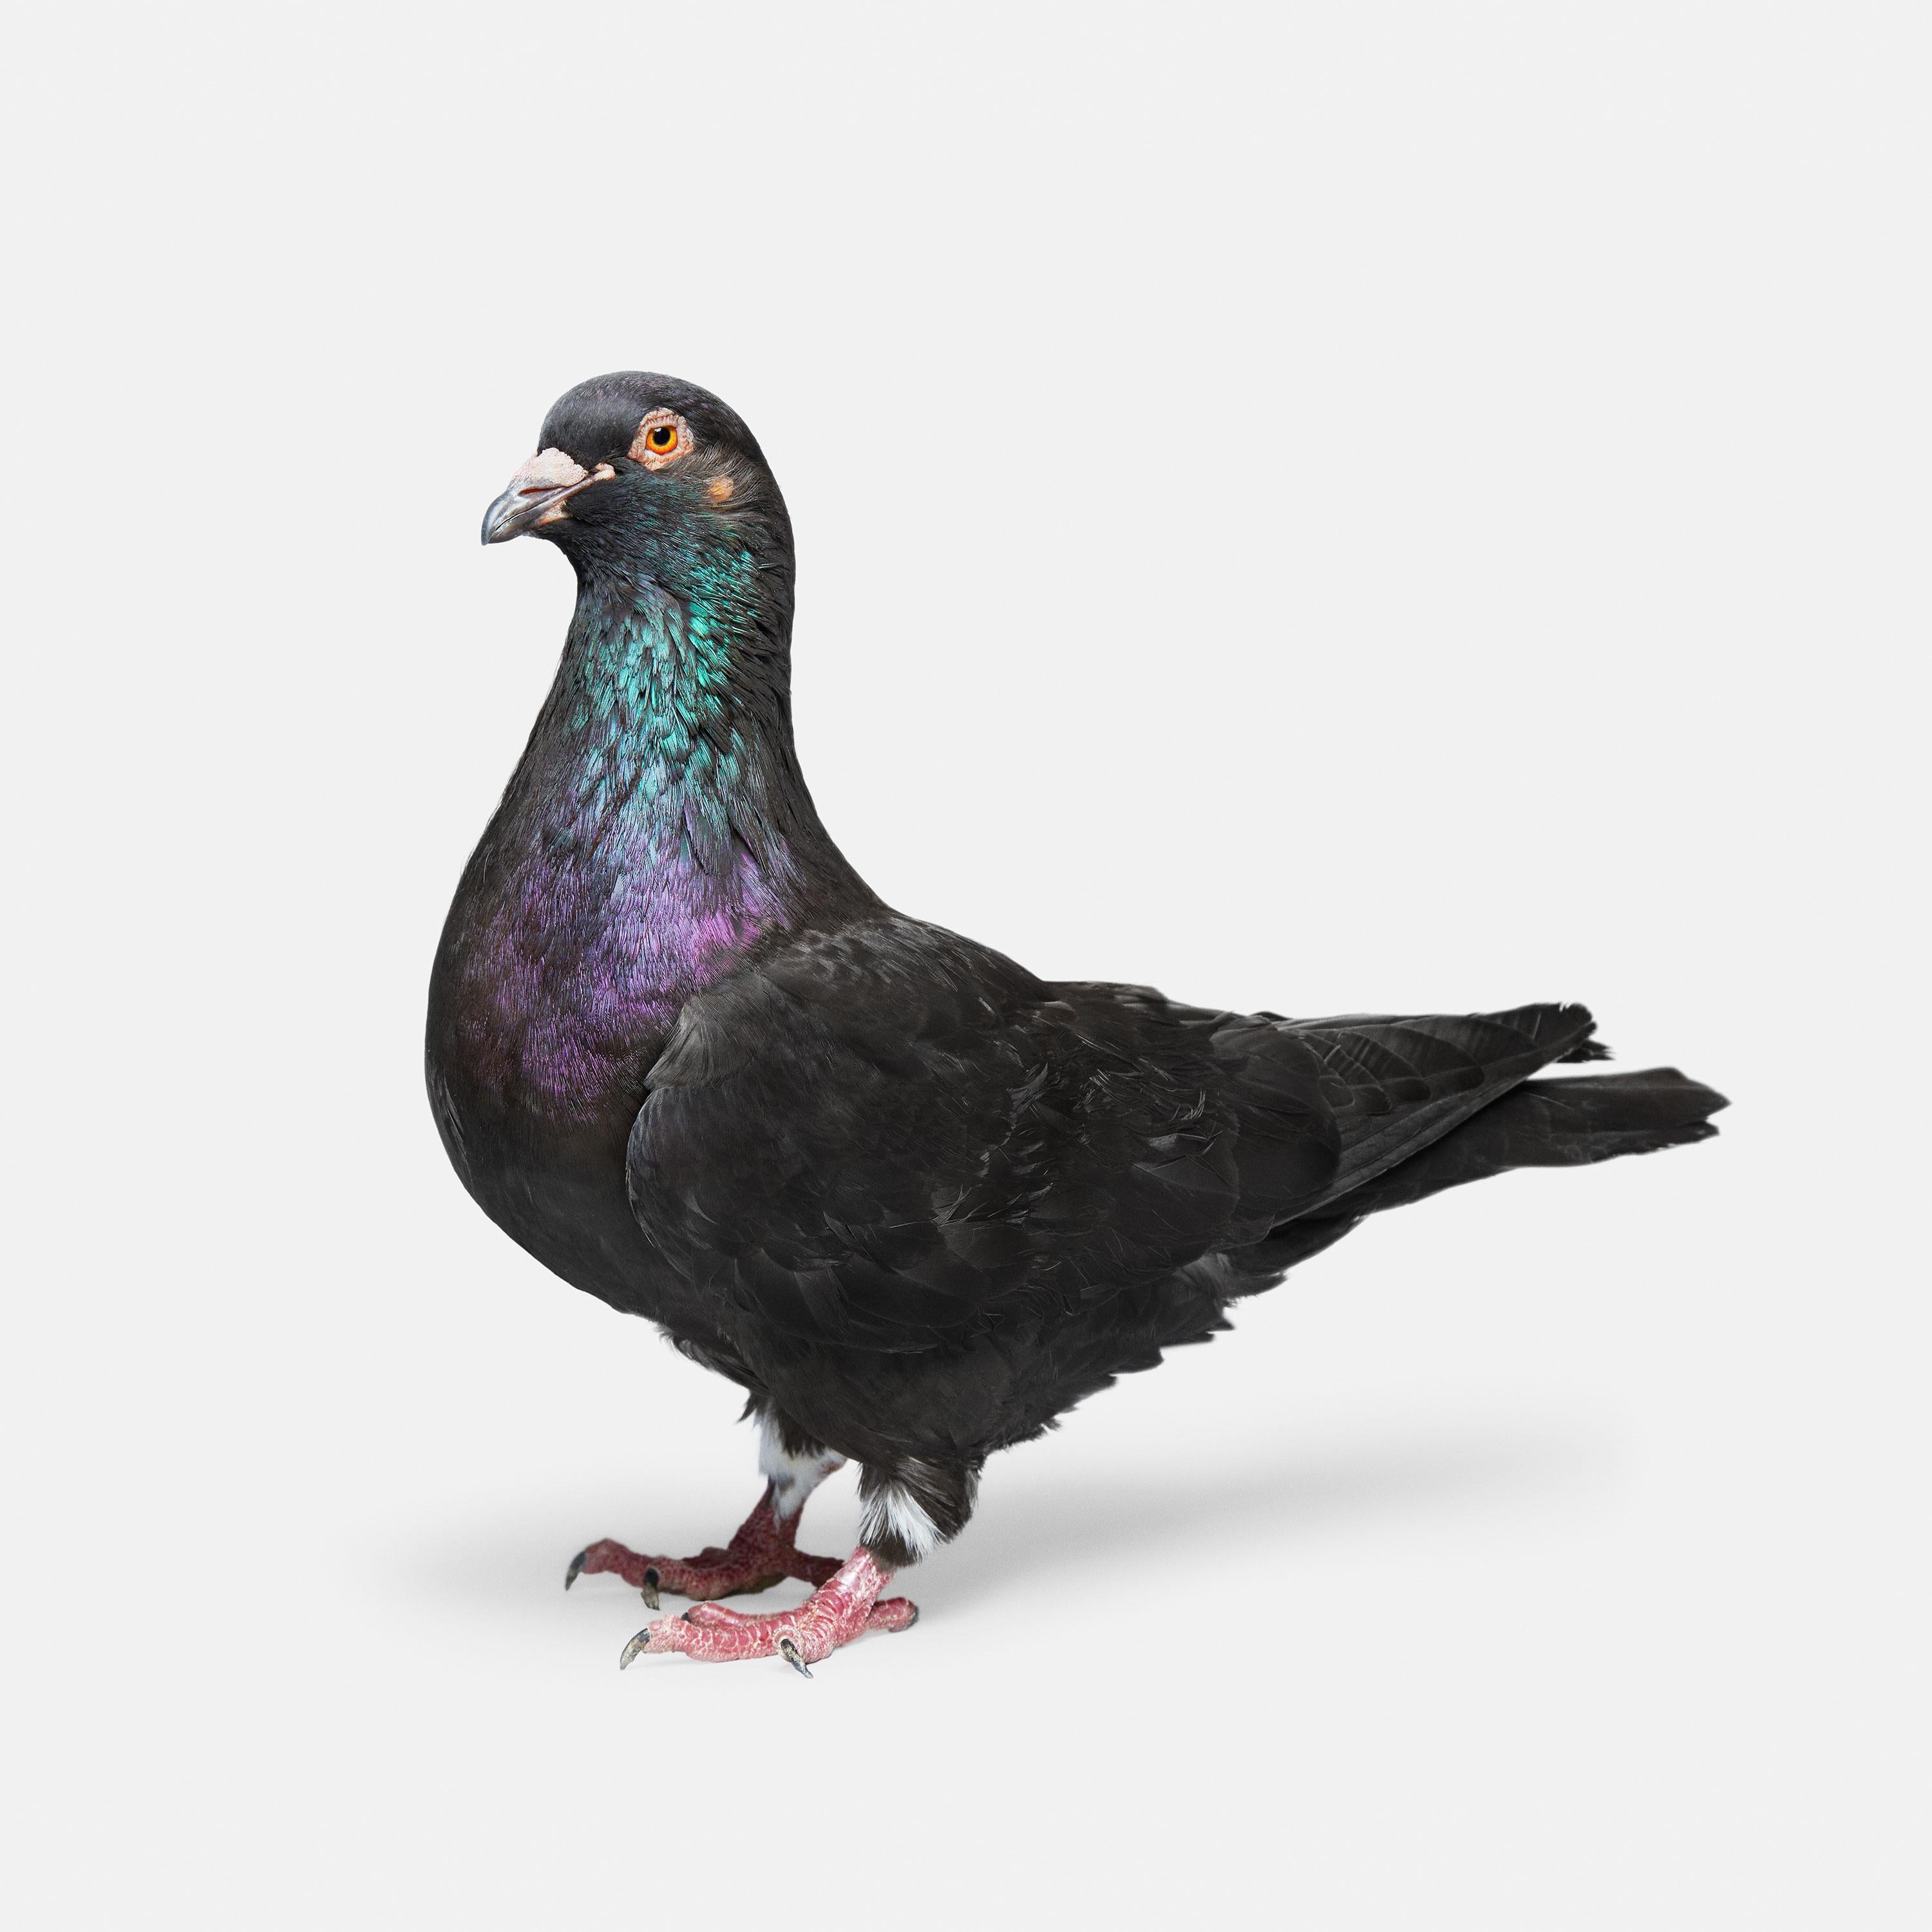 Randal Ford - Pigeon No. 3, Photography 2018, Printed After